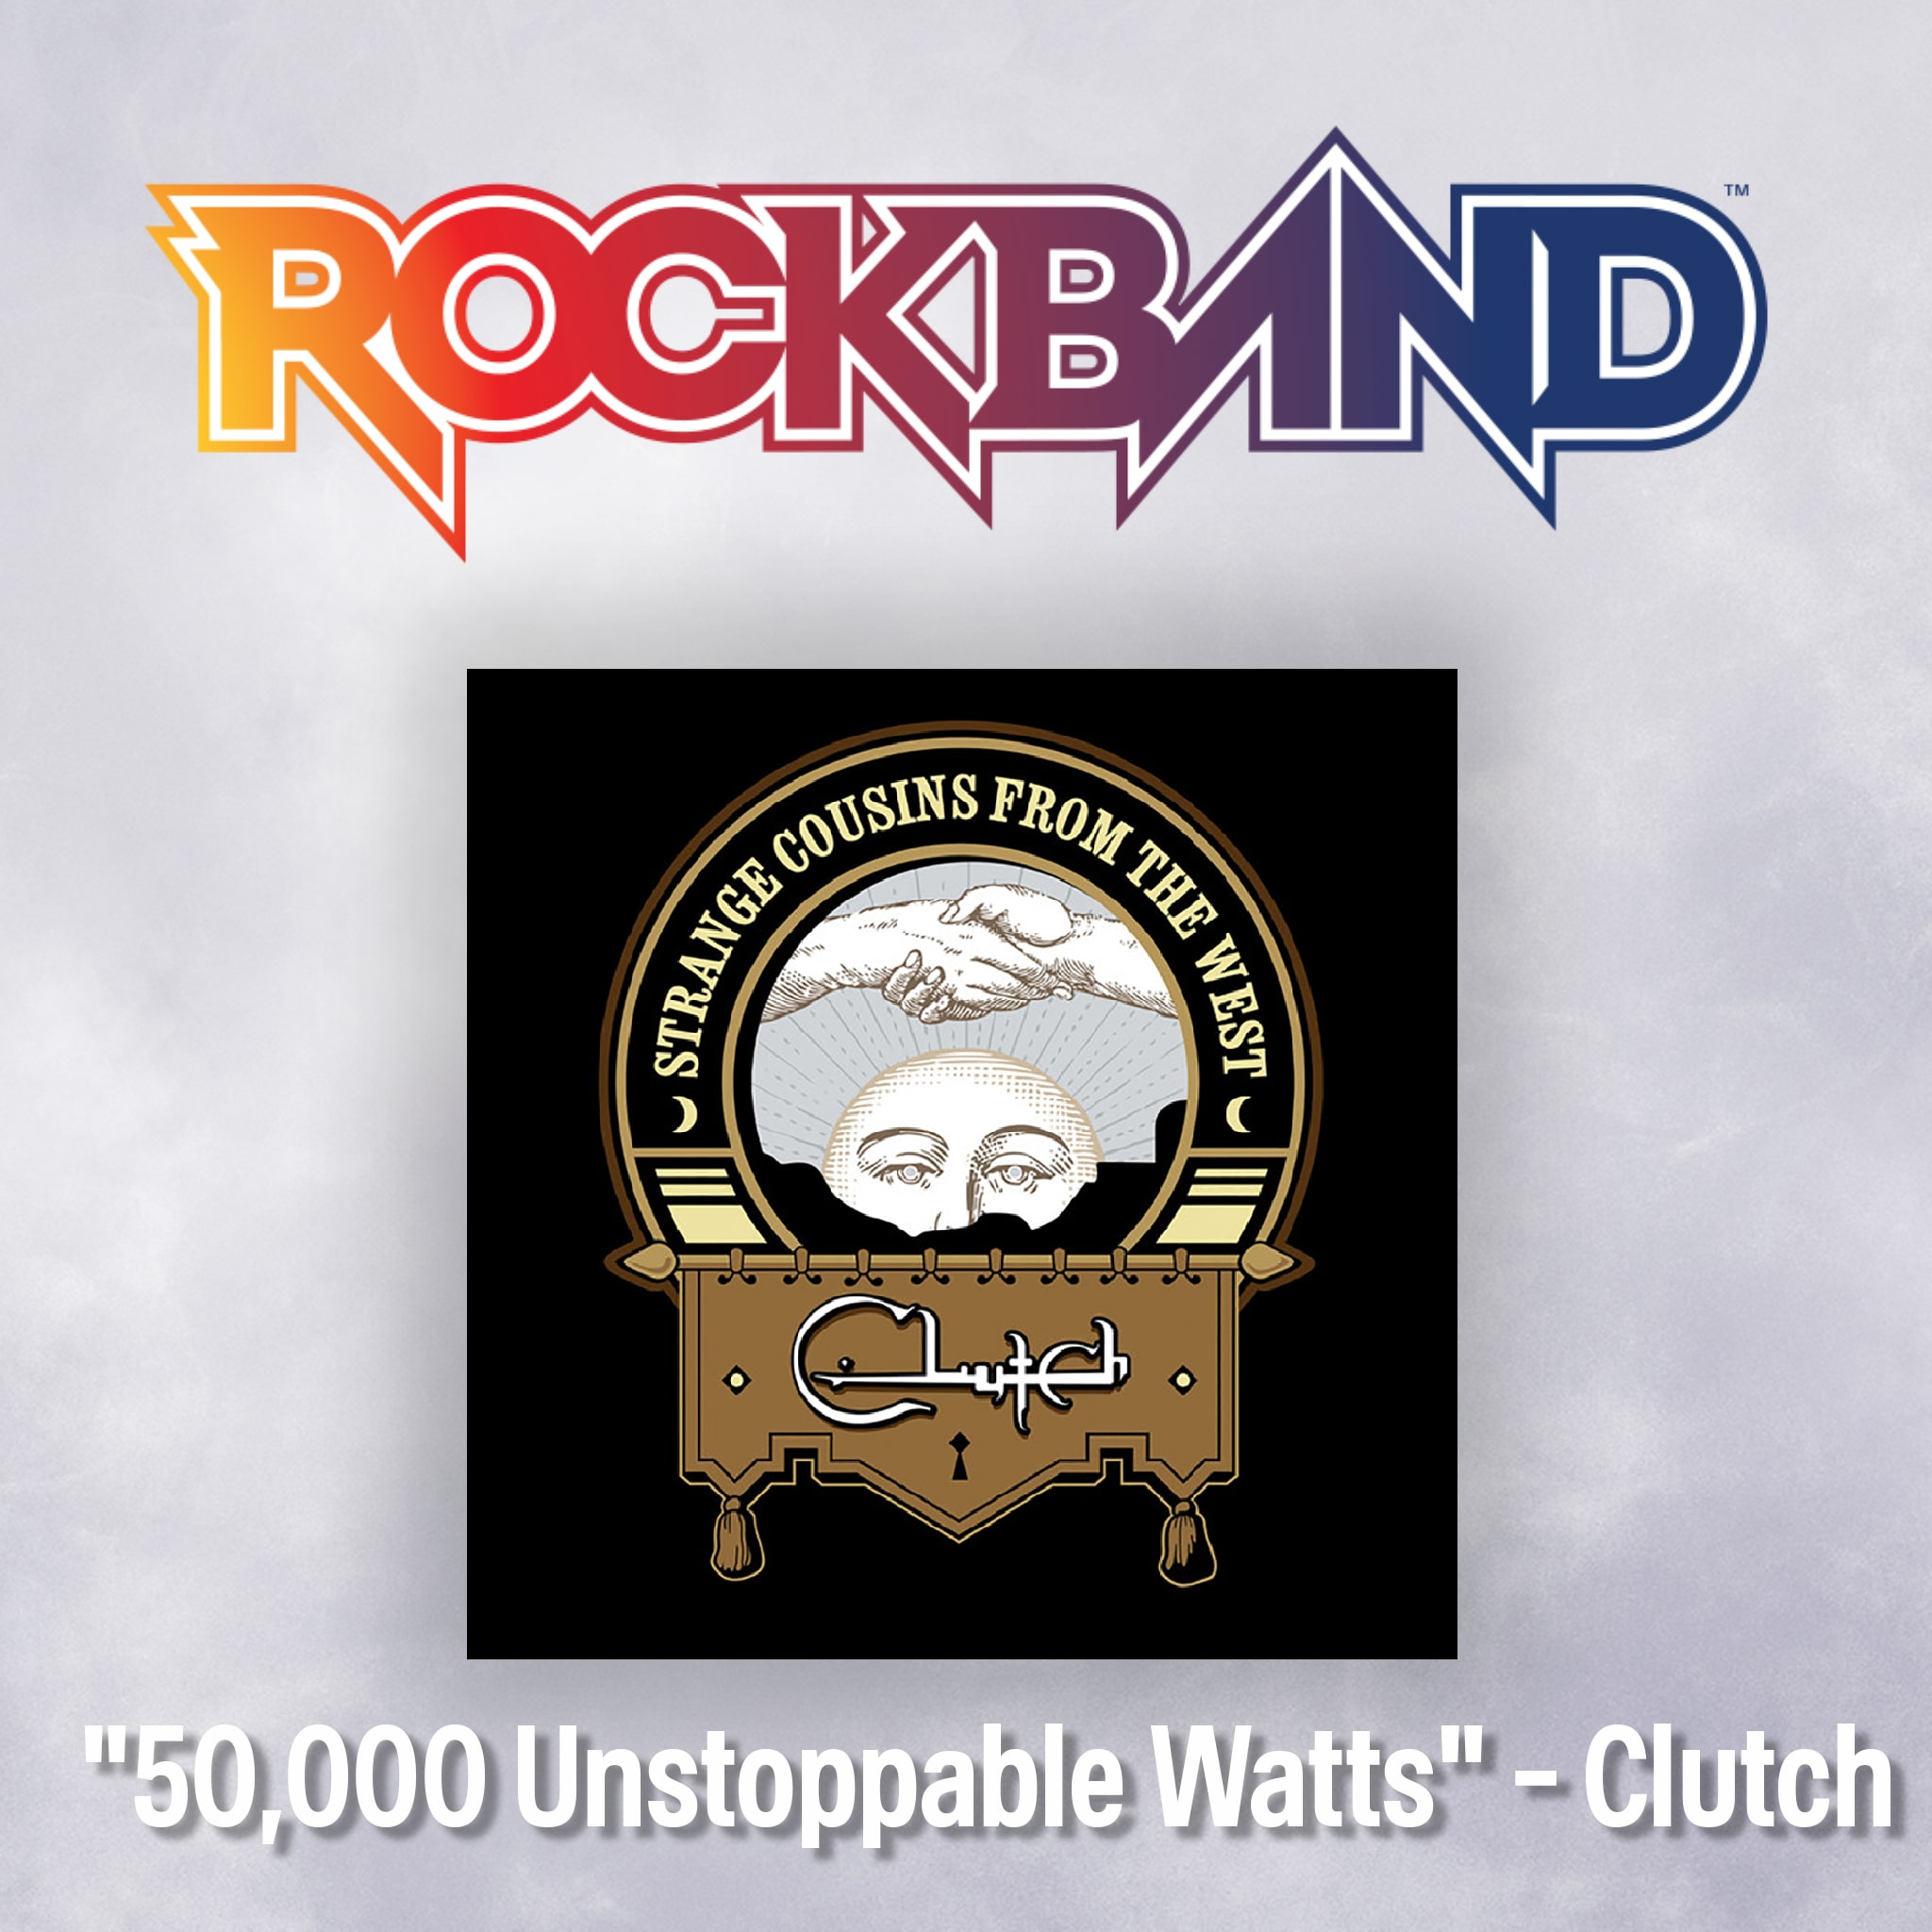 '50,000 Unstoppable Watts' - Clutch